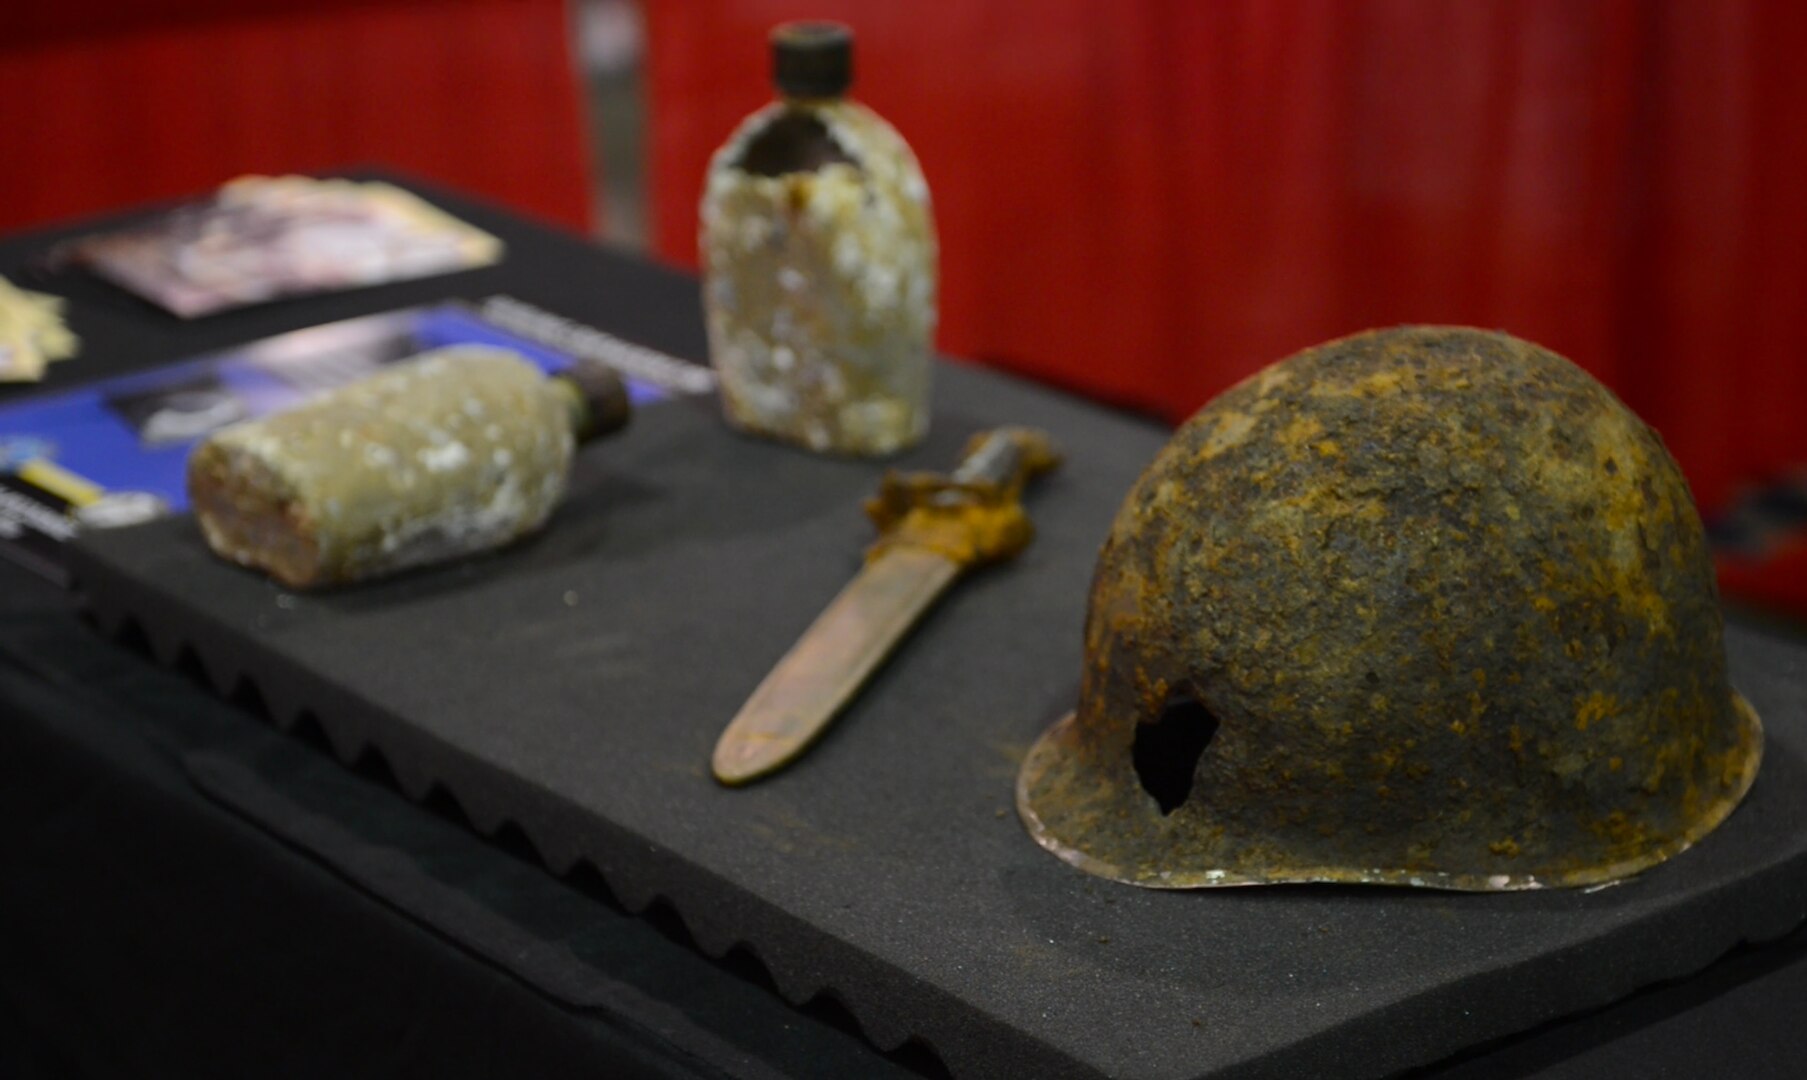 Artifacts from the Korean War are displayed on the Defense POW/MIA accounting agency booth during the Veterans of Foreign Wars Convention held at the Charlotte, North Carolina Convention Center July 23, 2016. The mission of the Defense POW/MIA Accounting Agency is to provide the fullest possible accounting for our missing personnel to their families and the nation. (Photo by U.S. Army Sgt. Tiffany Fudge)